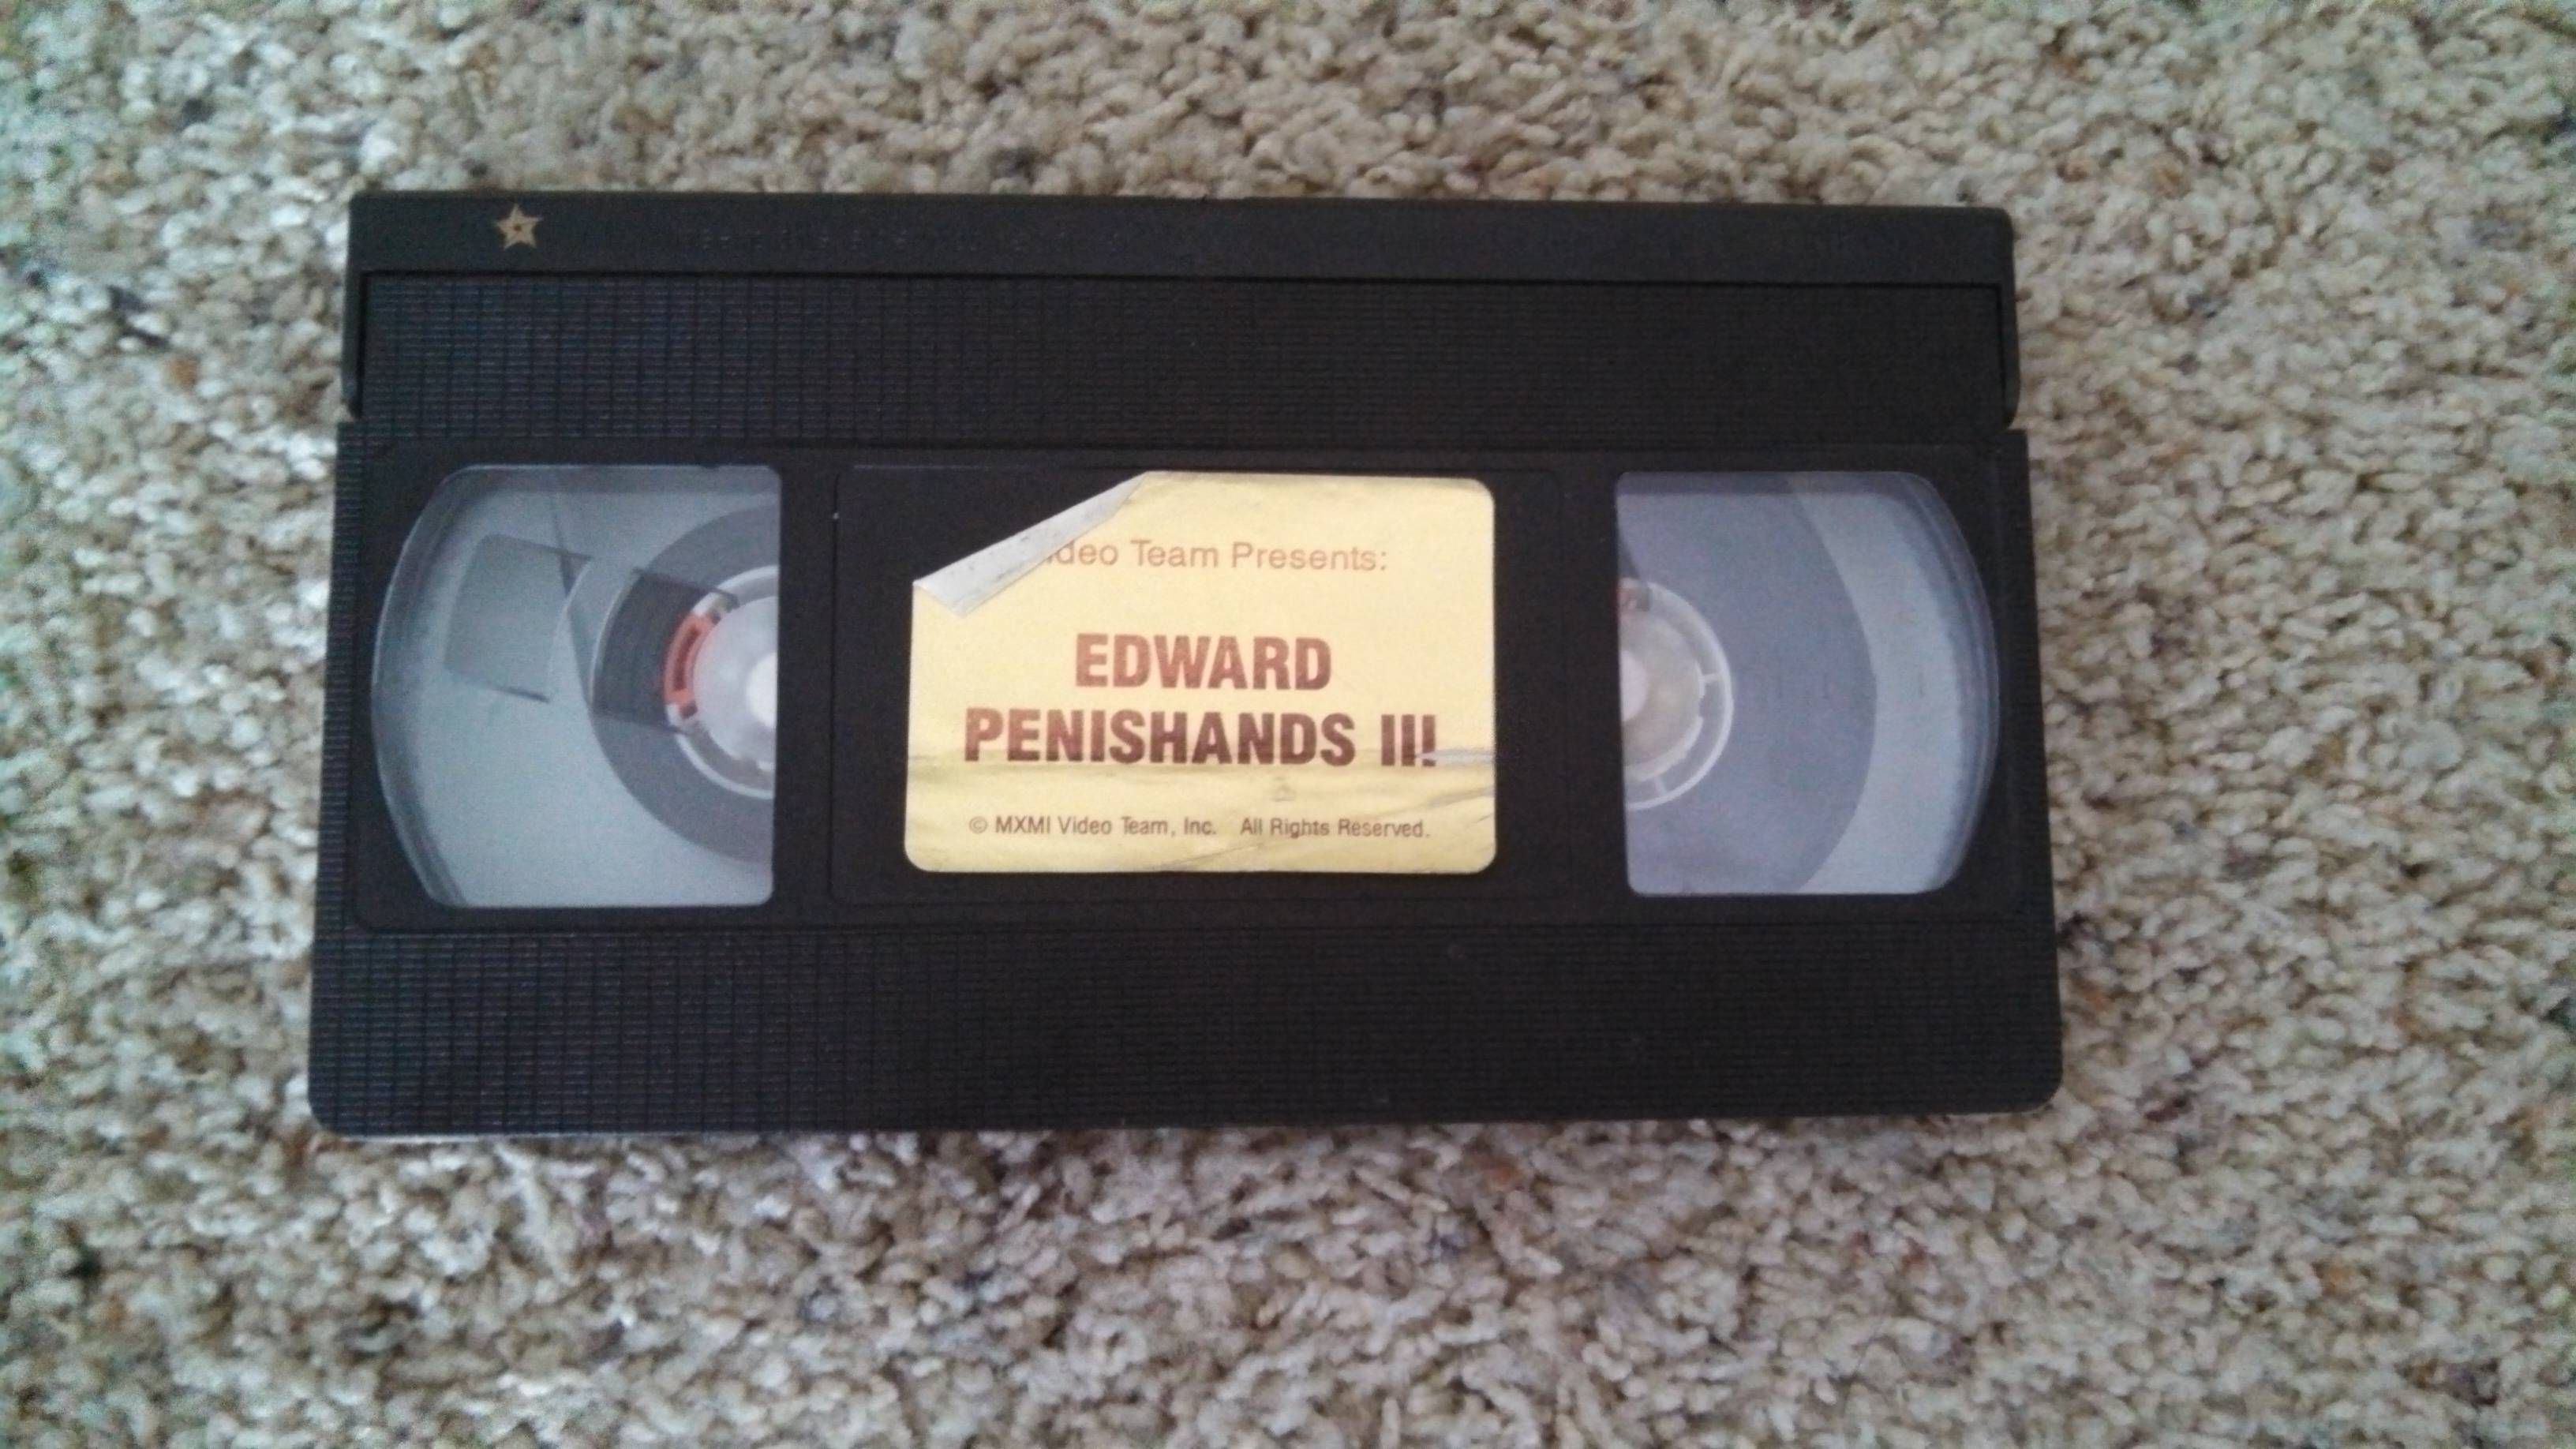 VHS tapes became obsolete around 15 years ago.